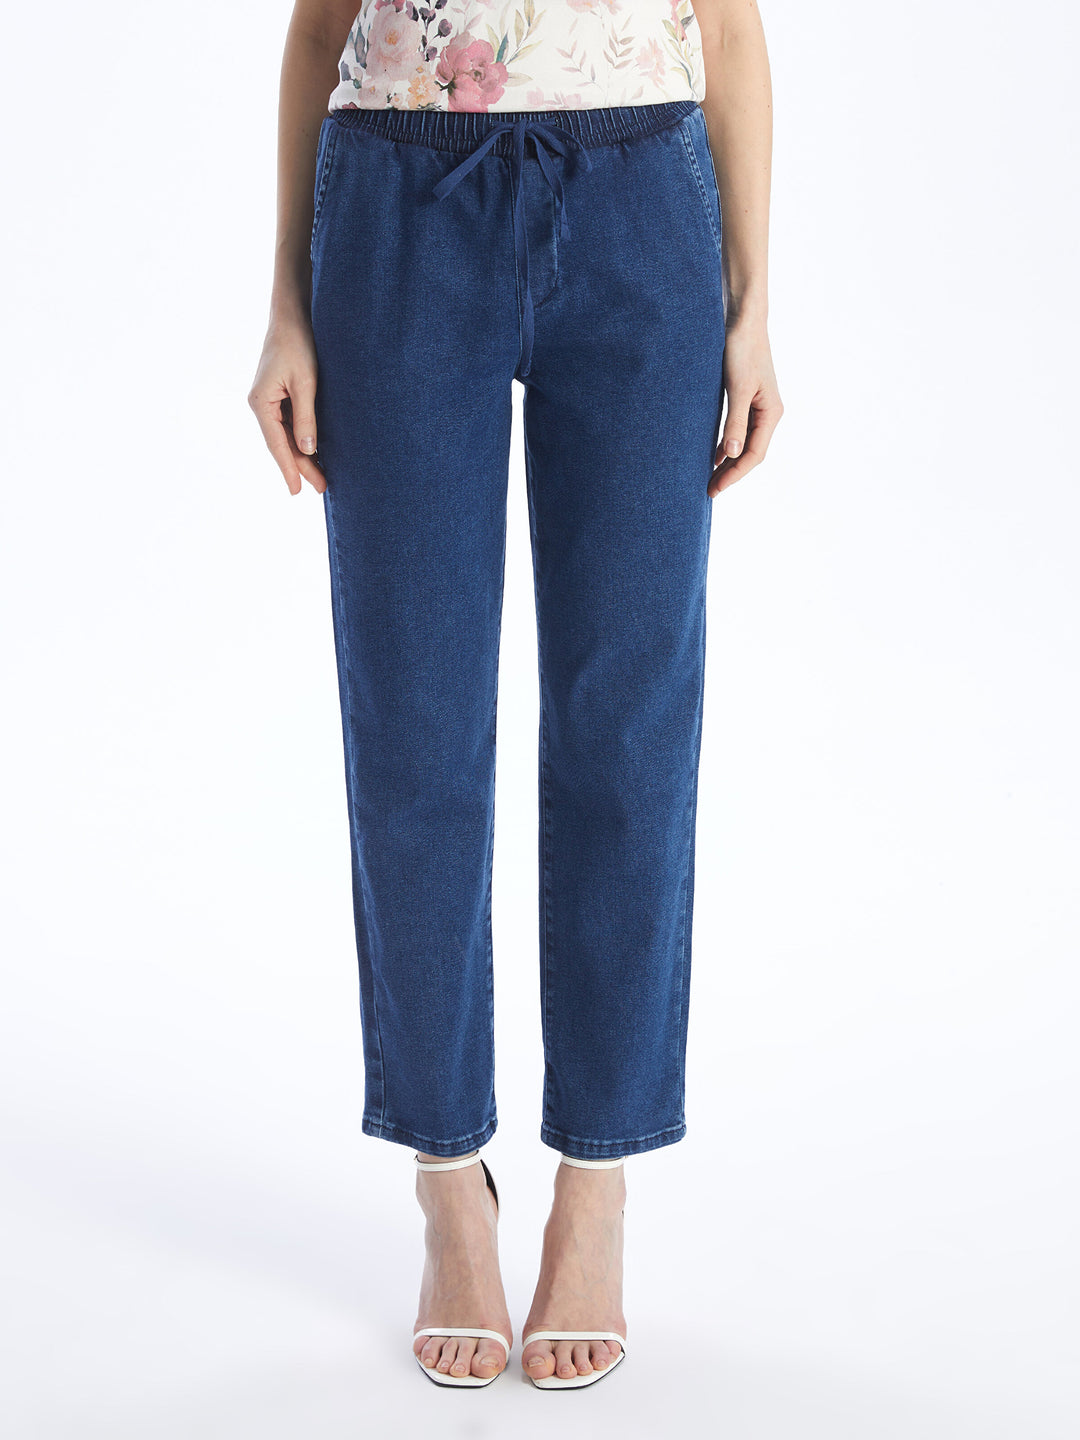 Straight Fit Women Jean Trousers With Elastic Waist